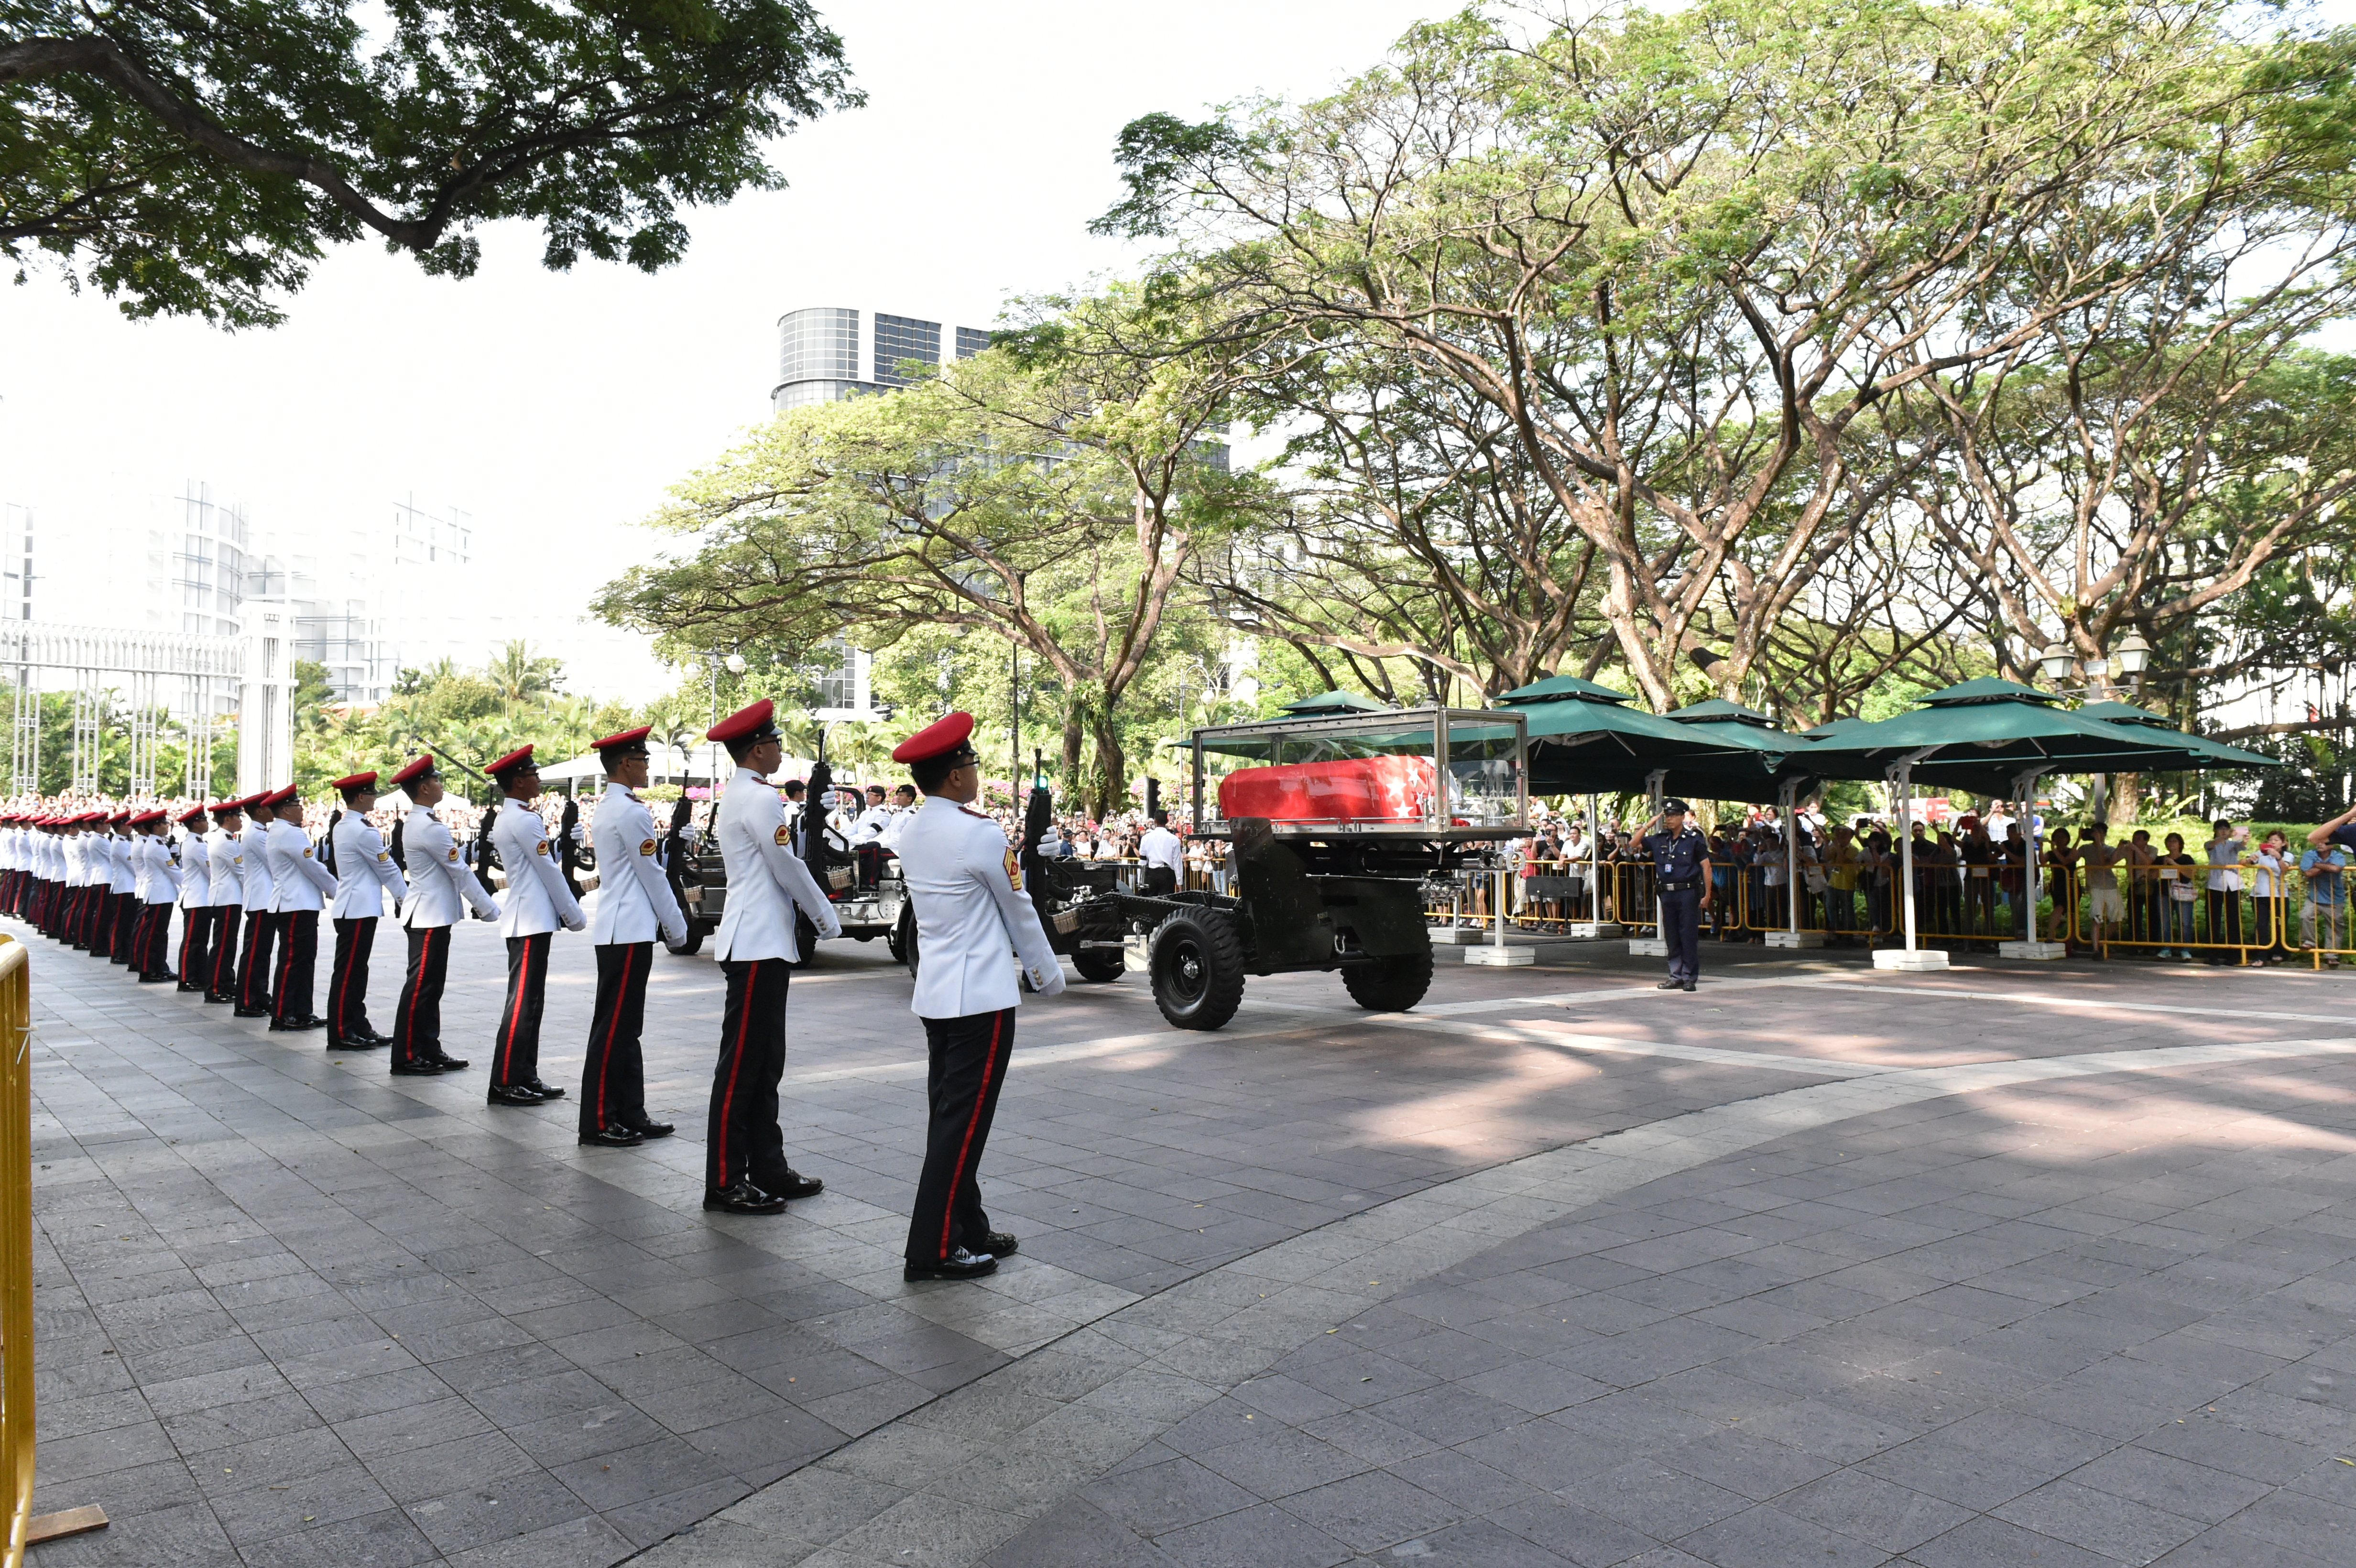 Lying in State of Mr Lee Kuan Yew - Mar 2015 (MINDEF Photo)